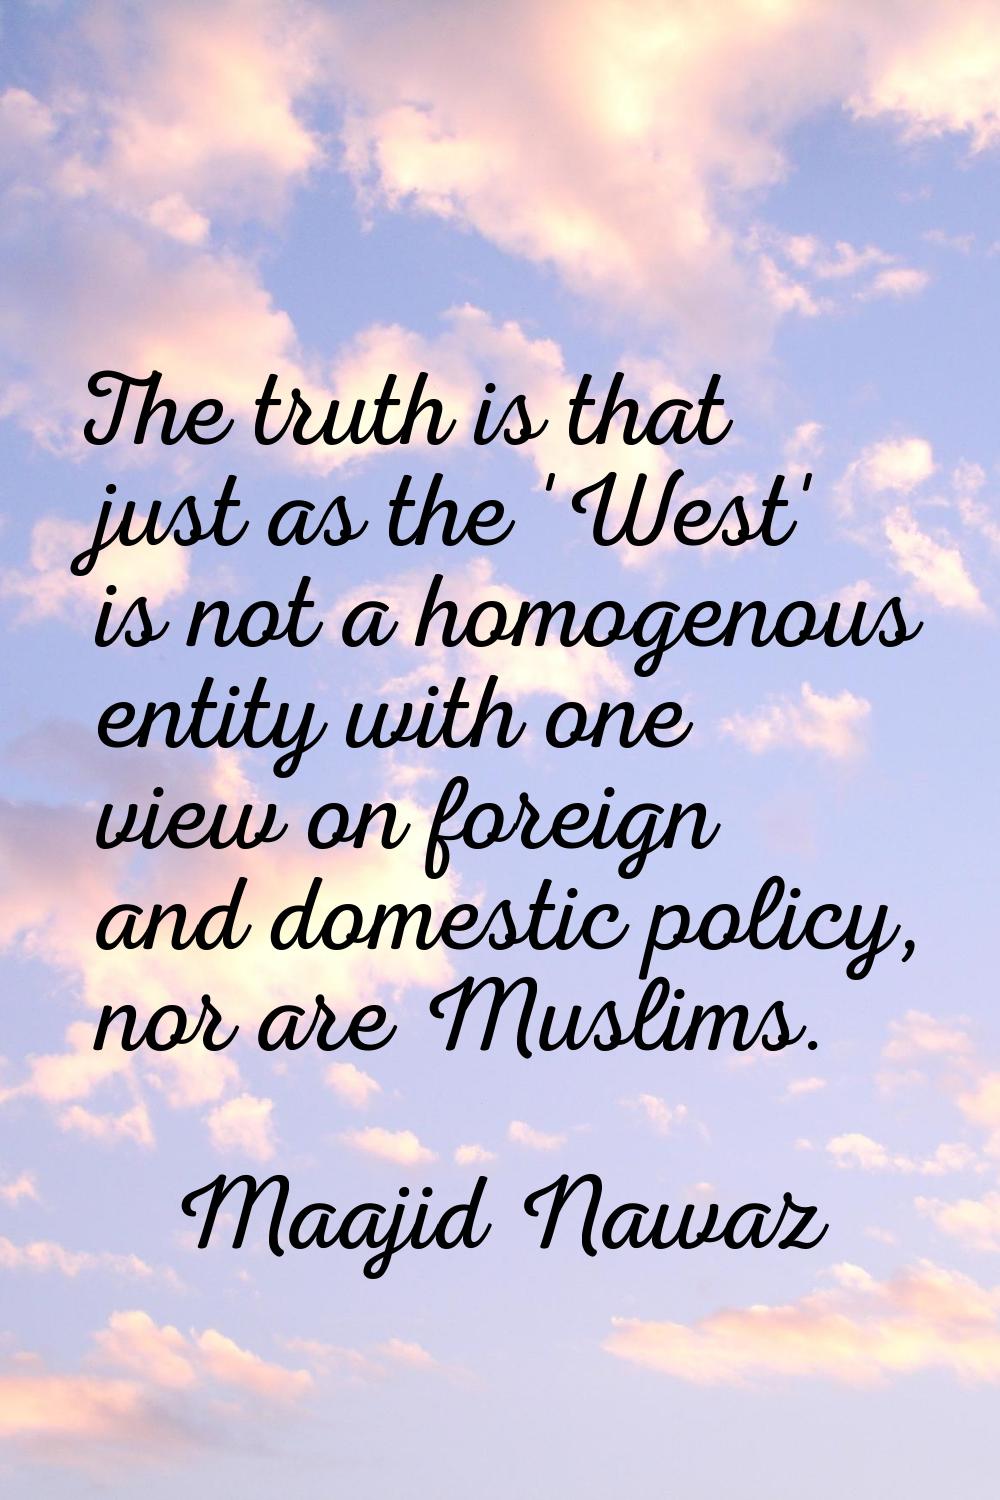 The truth is that just as the 'West' is not a homogenous entity with one view on foreign and domest